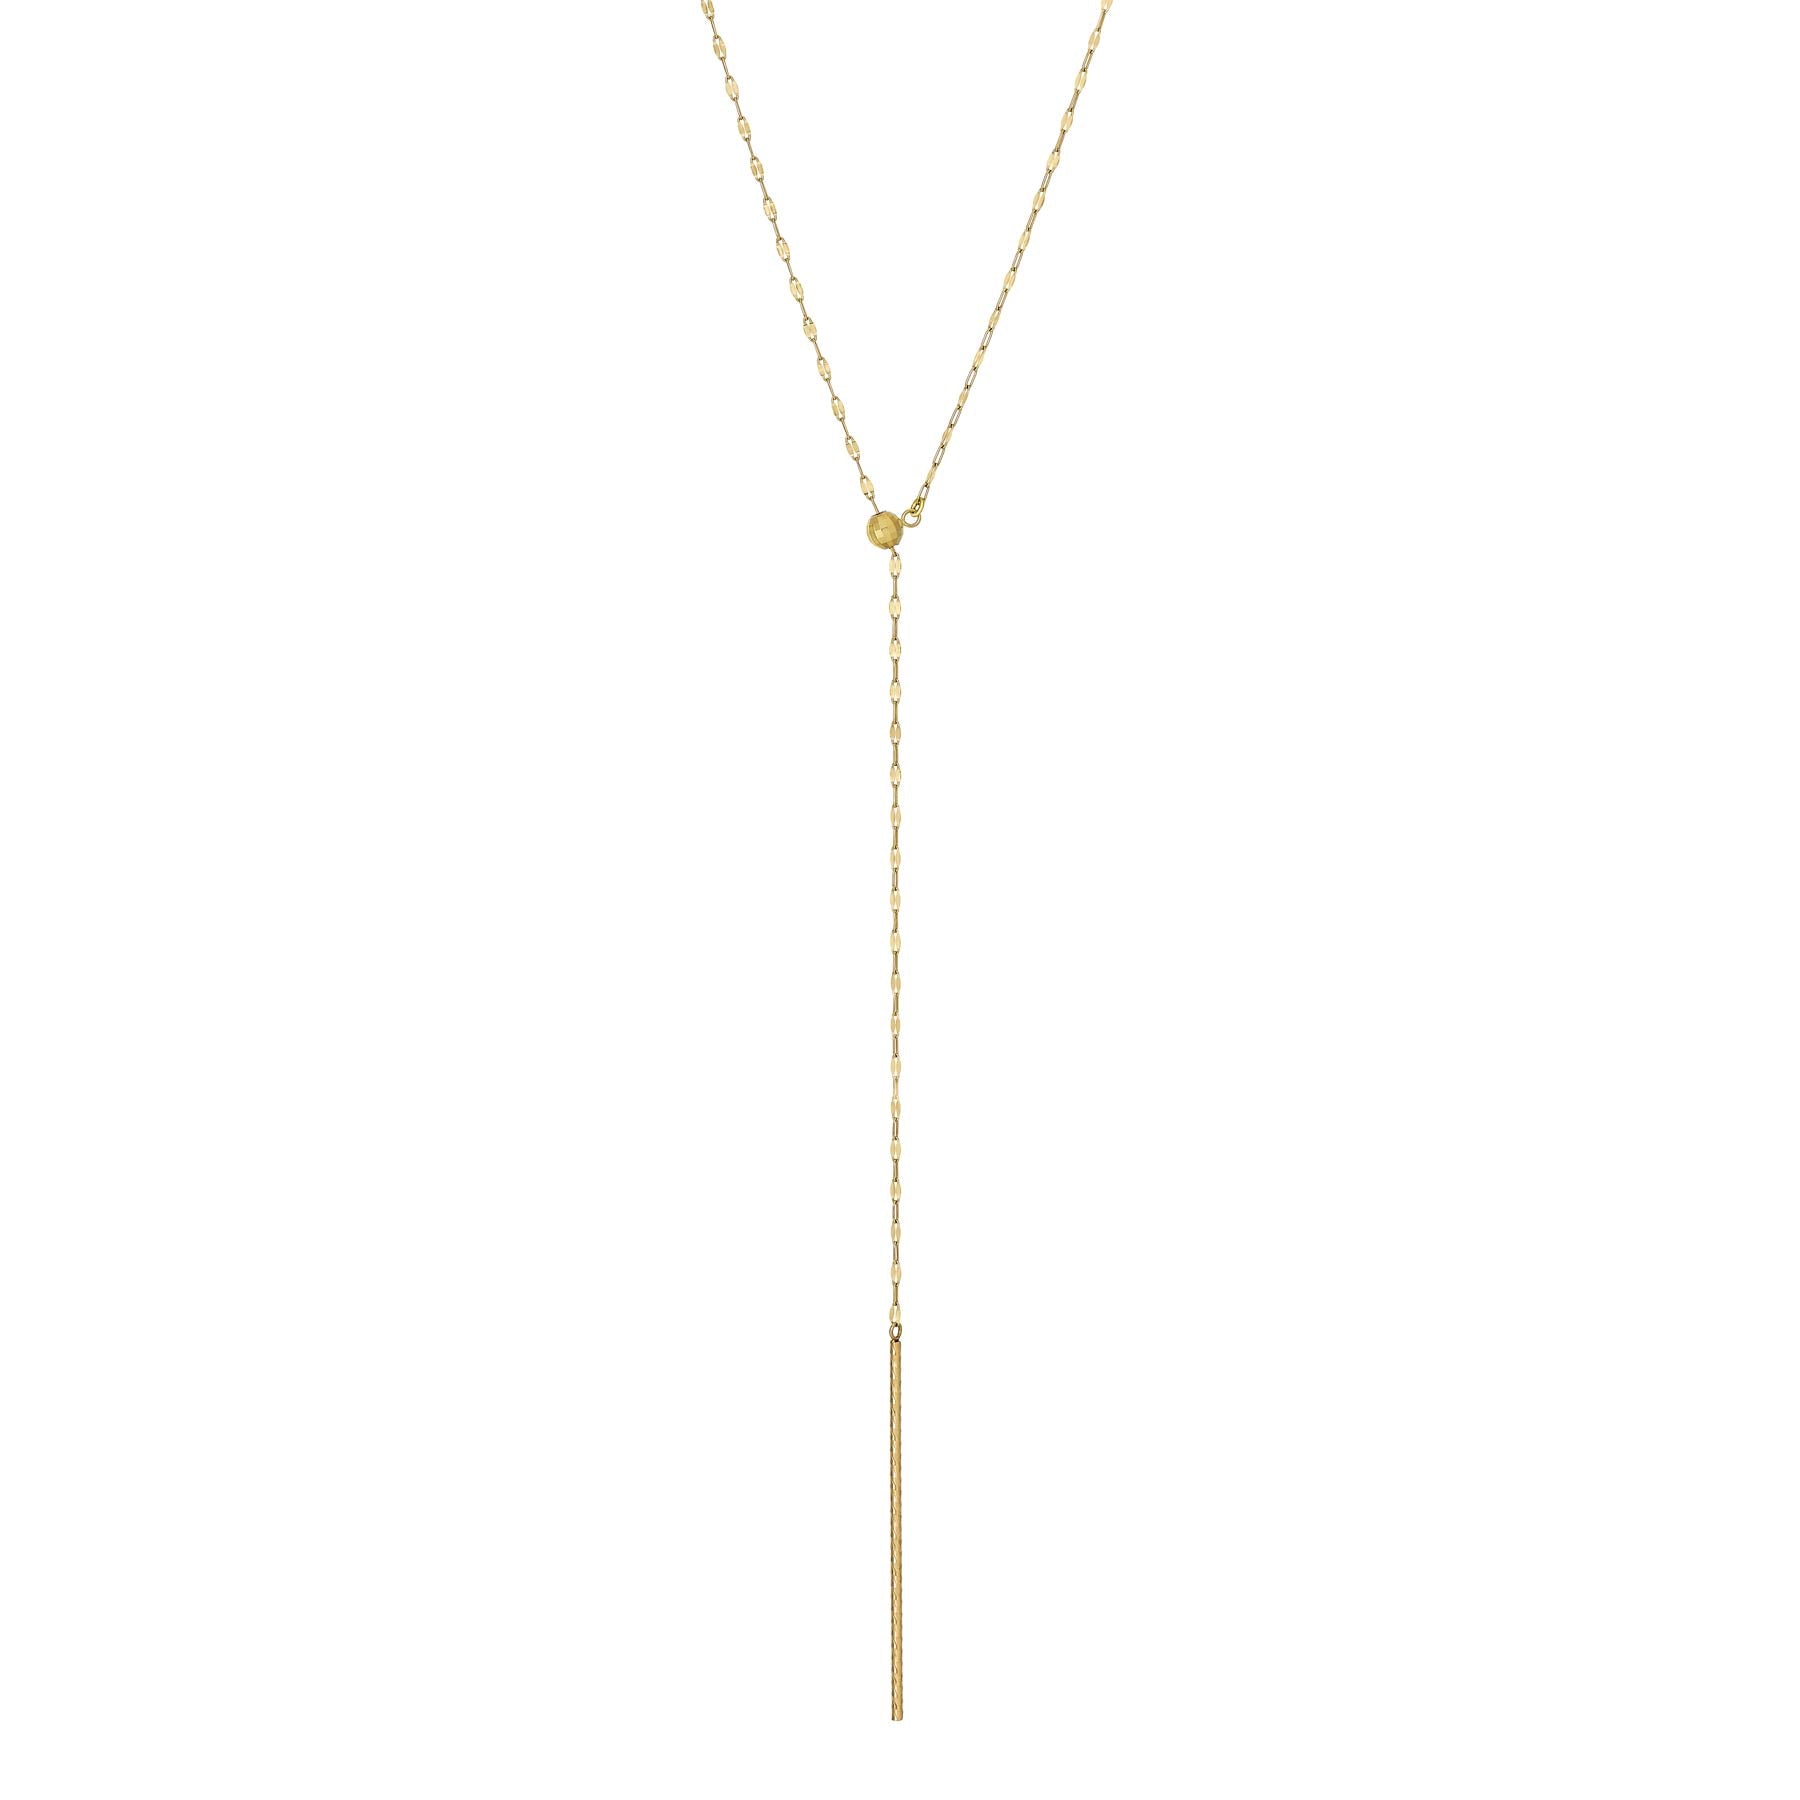 10K Yellow Gold Y-Shaped Chain Bar Long Necklace - Product Image